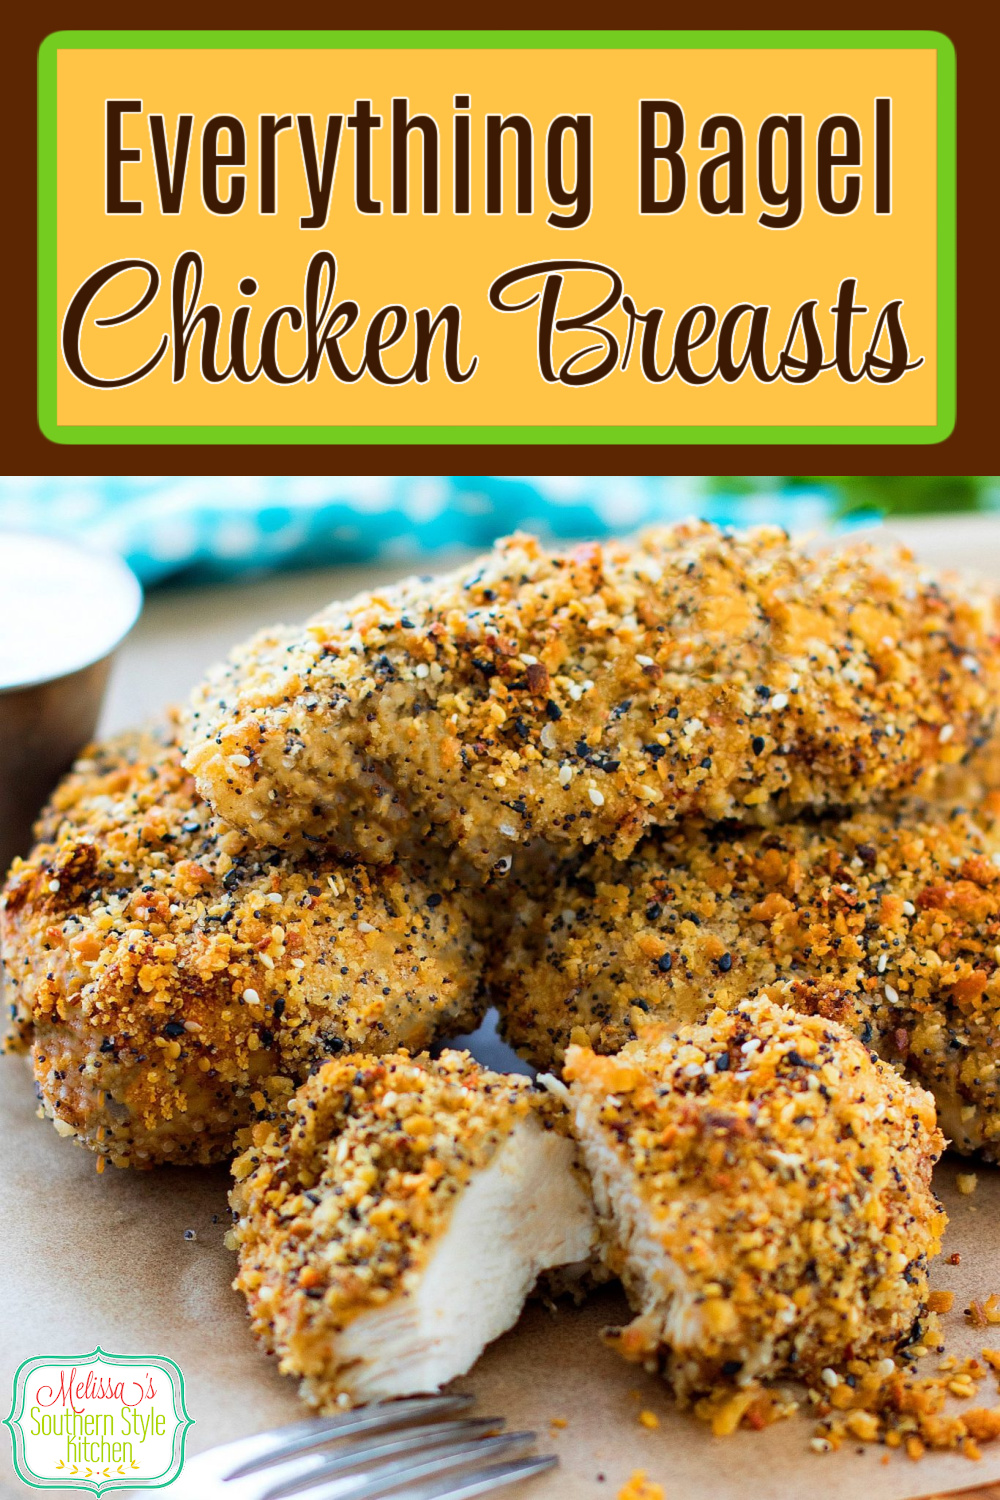 This easy recipe for Everything Bagel Chicken Breasts is perfection served with your favorite dipping sauces on the side for dipping. #chicken #chickenbreasts #chickenrecipes #everythingbagel #seasonedchicken #easychickenbreastrecipes #everythingbagelseasoning #dinner #dinnerideas #southernfood #southernrecipes #bakedchicken via @melissasssk